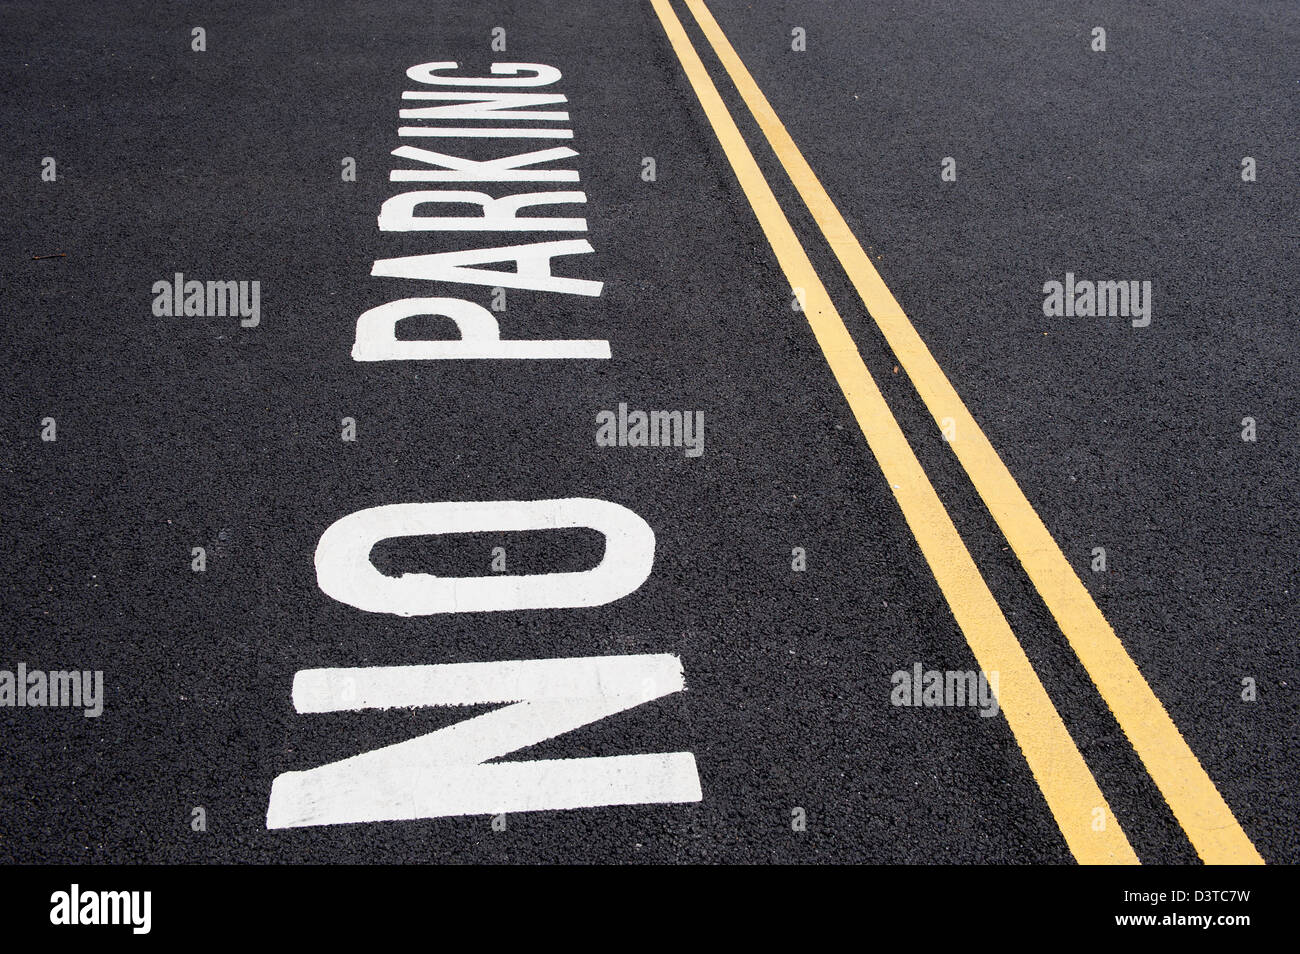 No Parking sign written on road next to double yellow lines Stock Photo